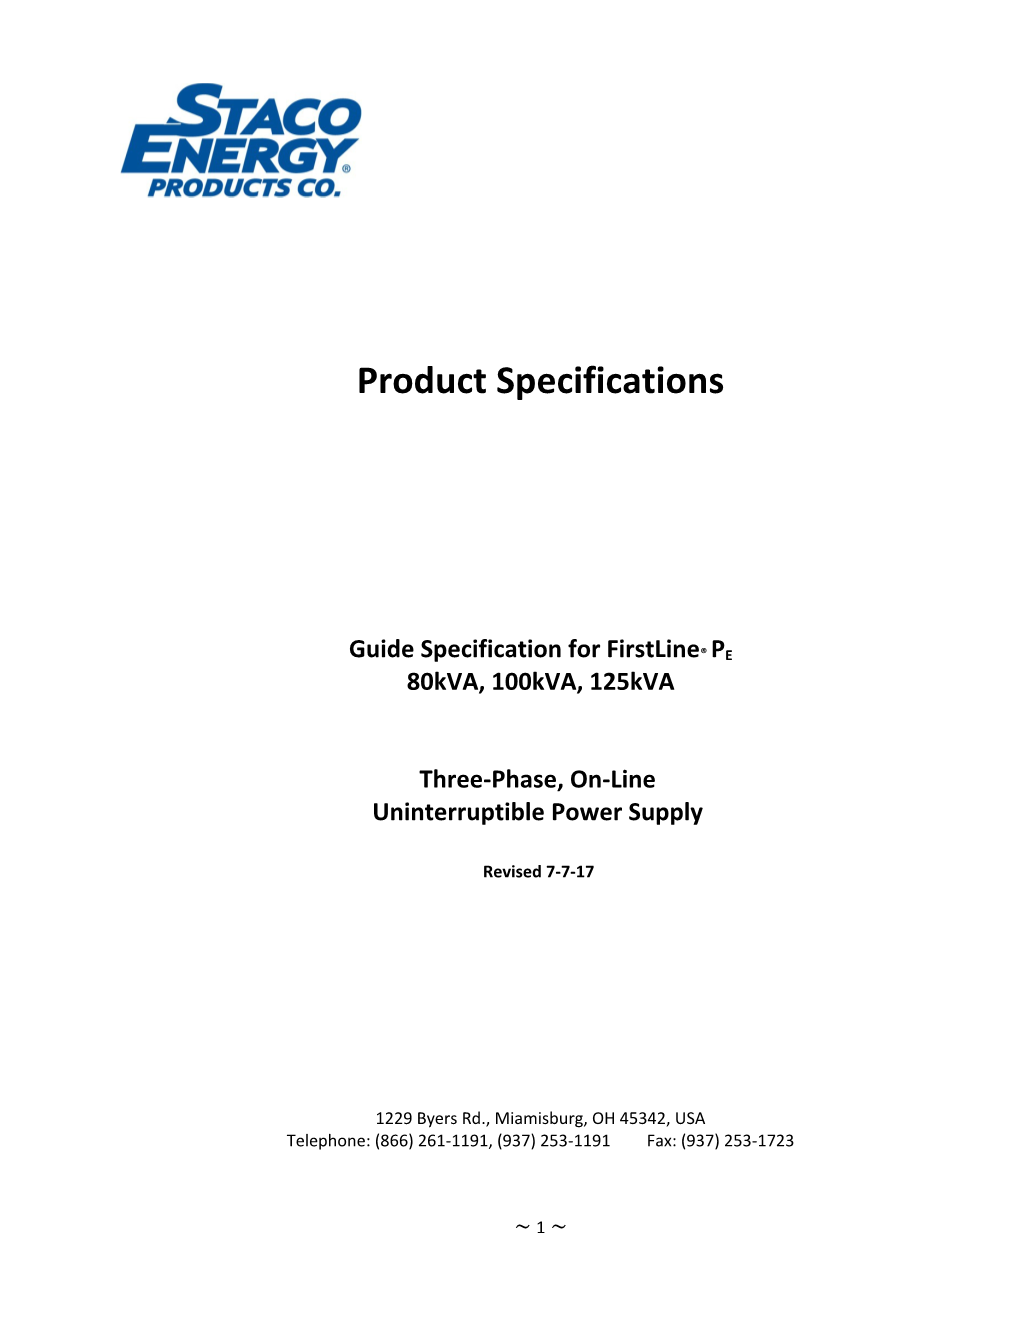 Guide Specification for Firstline PE